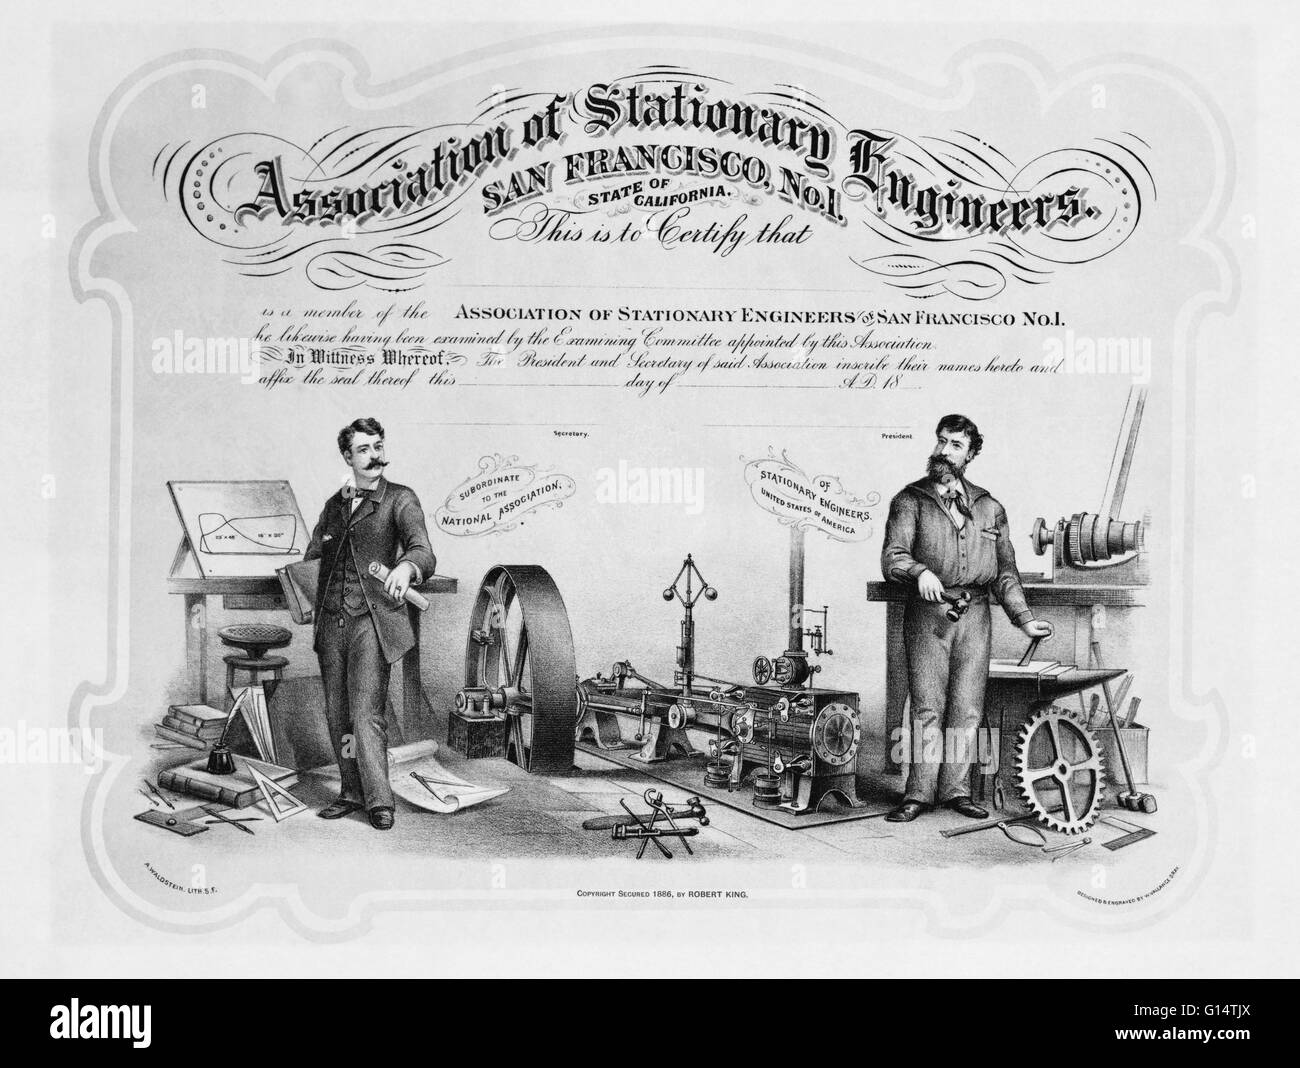 Association of Stationary Engineers membership document from 1886; groups like these were the early precursors to the modern labor unions. Stock Photo